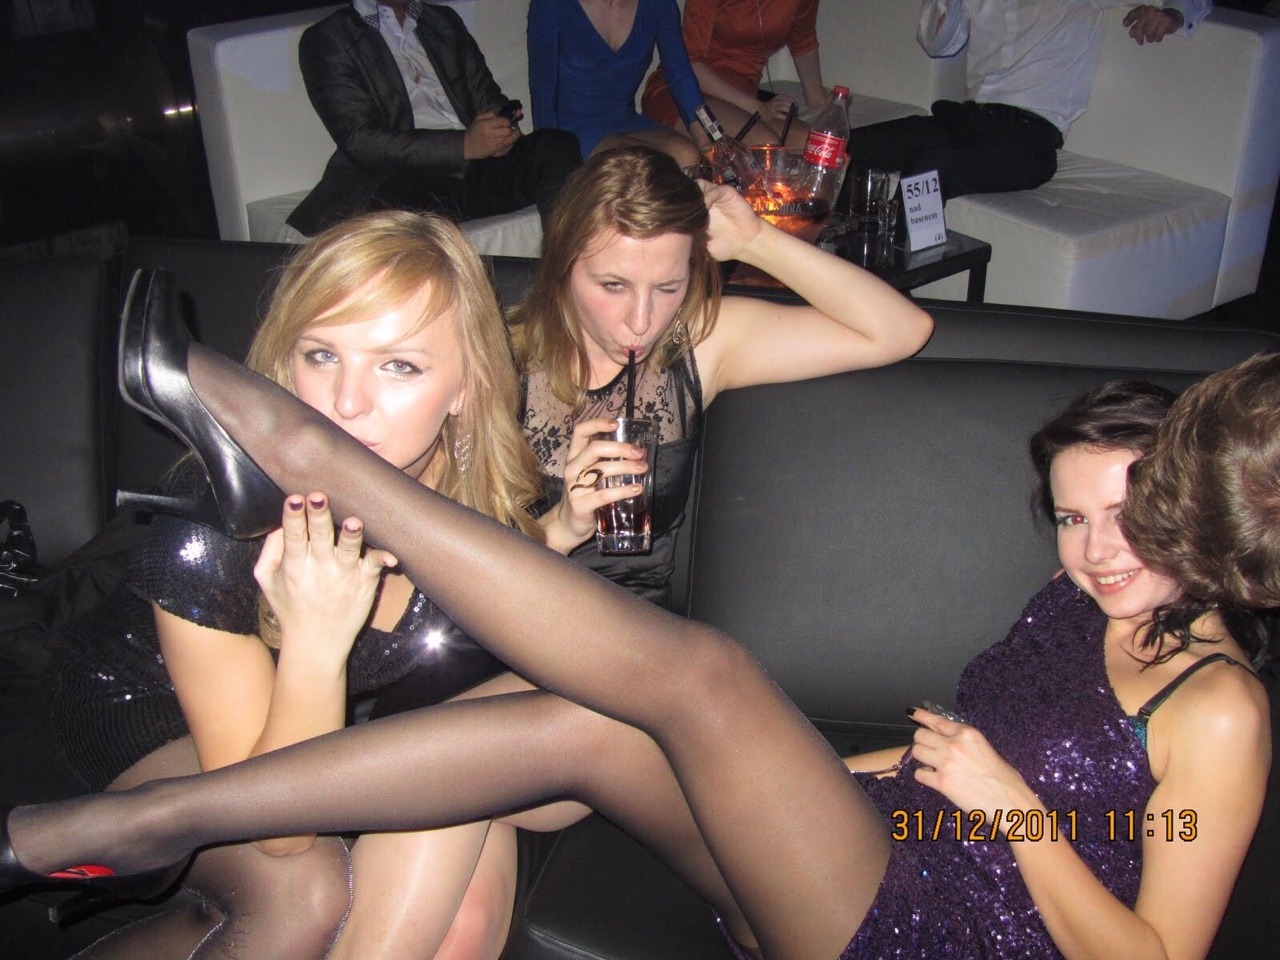 Teen Pantyhose - Teen pantyhose party - Porn pictures